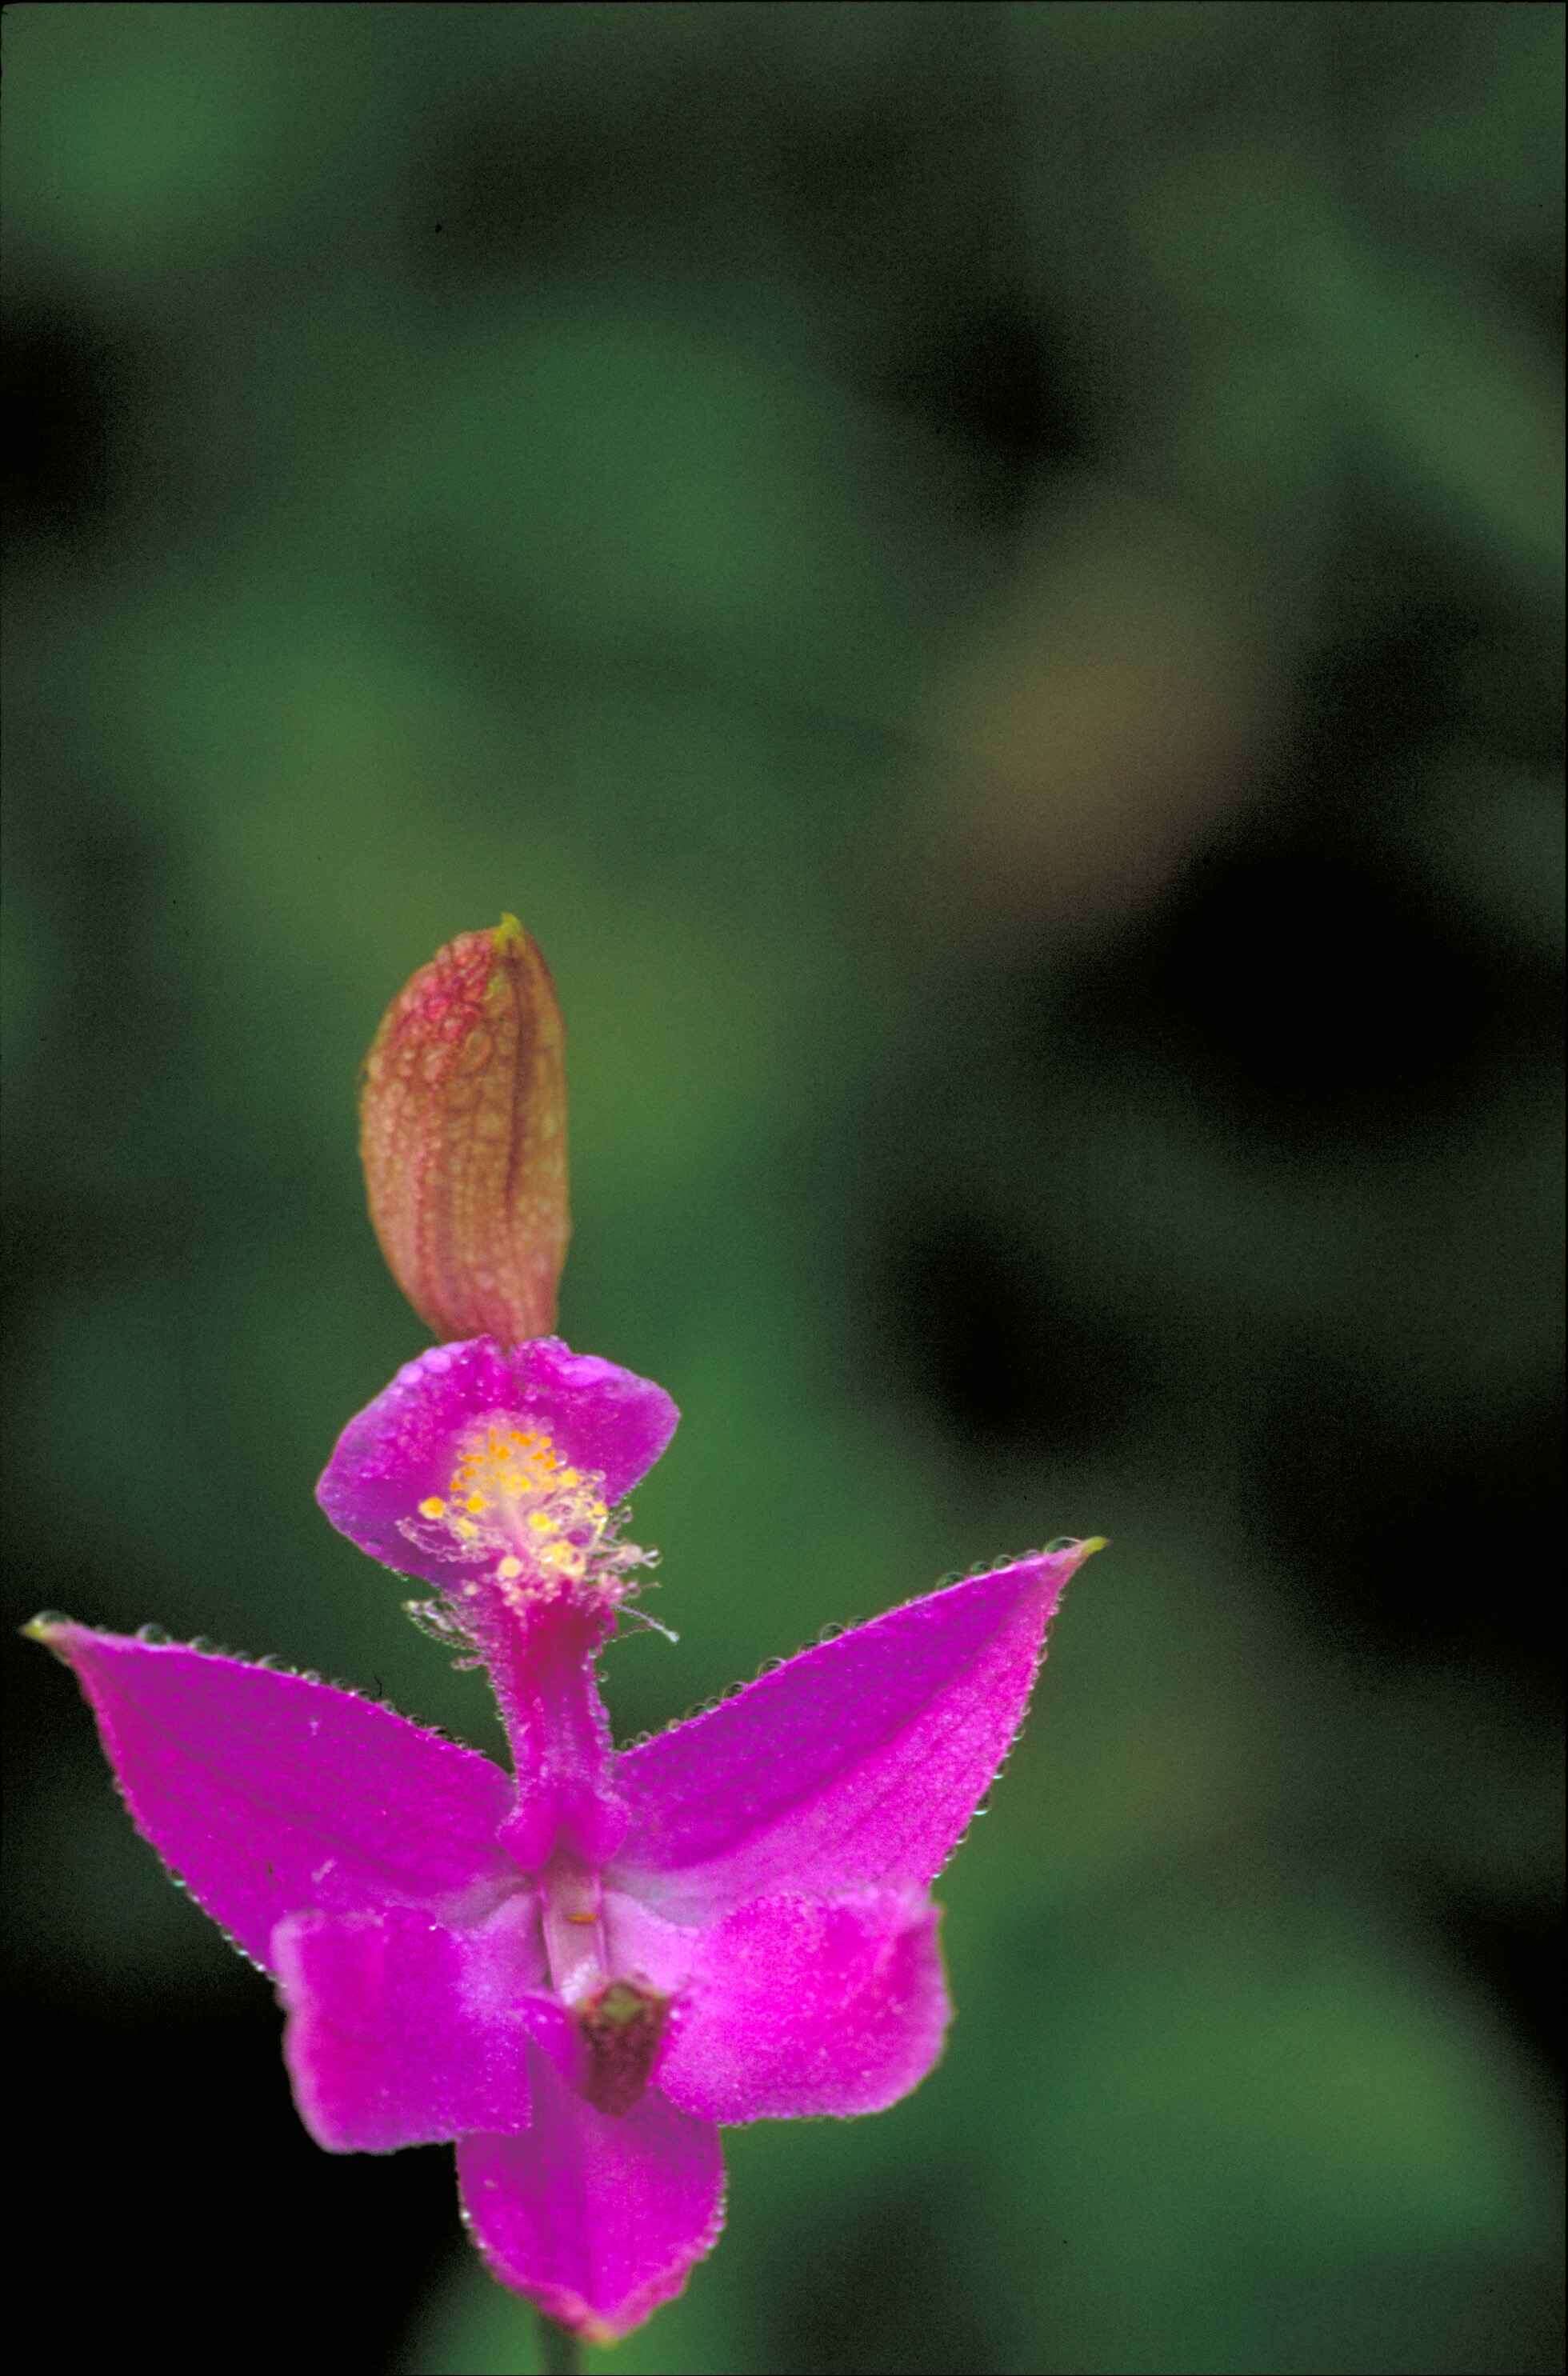 Image of tuberous grasspink